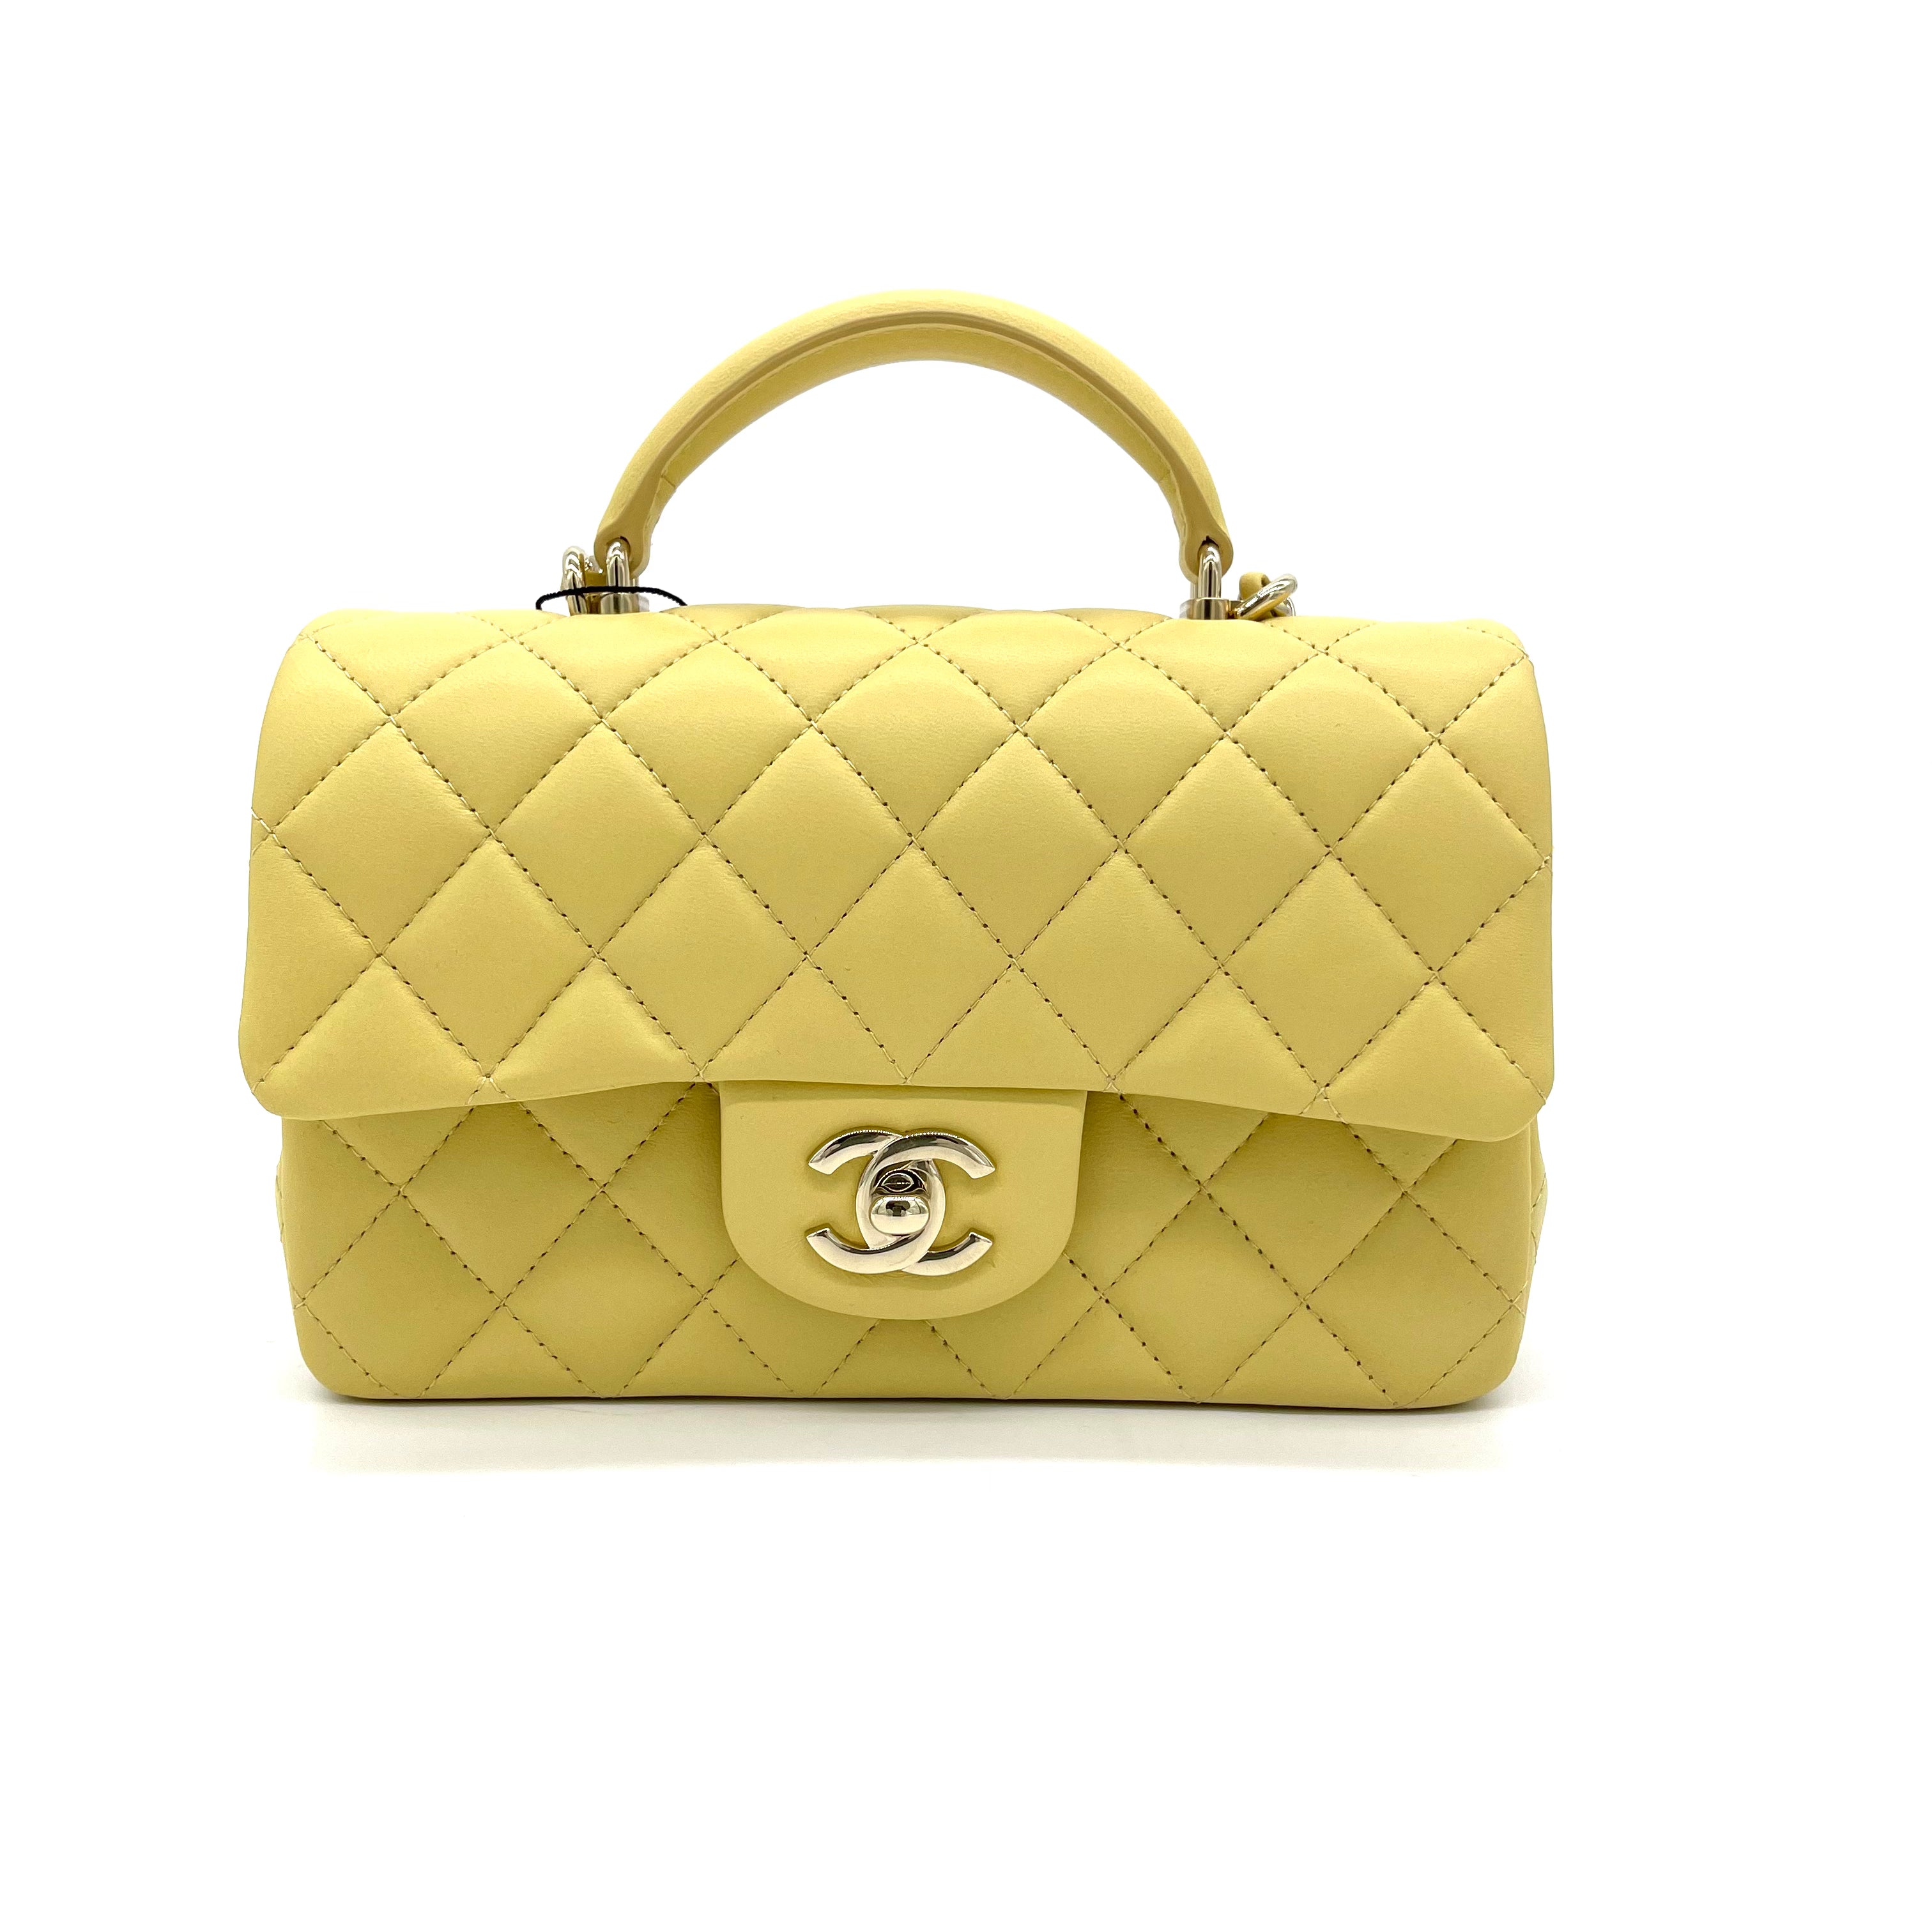 CHANEL Mini Bags & CHANEL Classic Flap Handbags for Women, Authenticity  Guaranteed